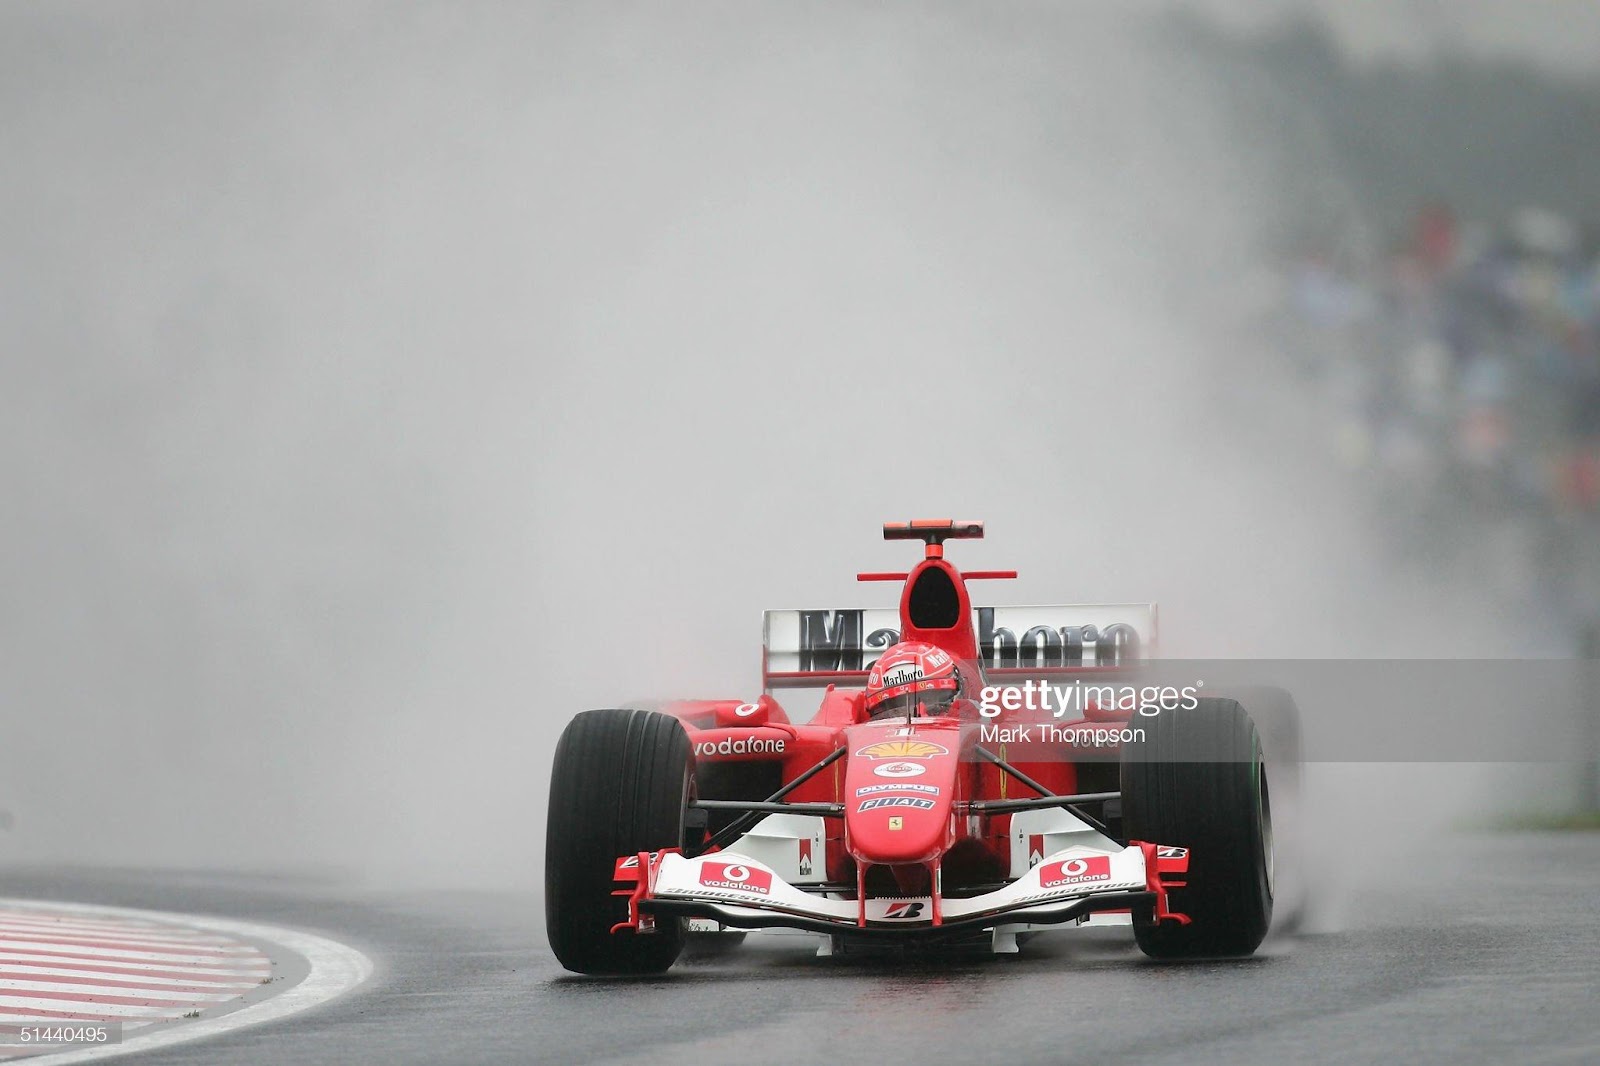 Michael Schumacher, Ferrari, during practice for the Formula One Japanese Grand Prix at Suzuka Circuit on October 8, 2004 in Tokyo. 